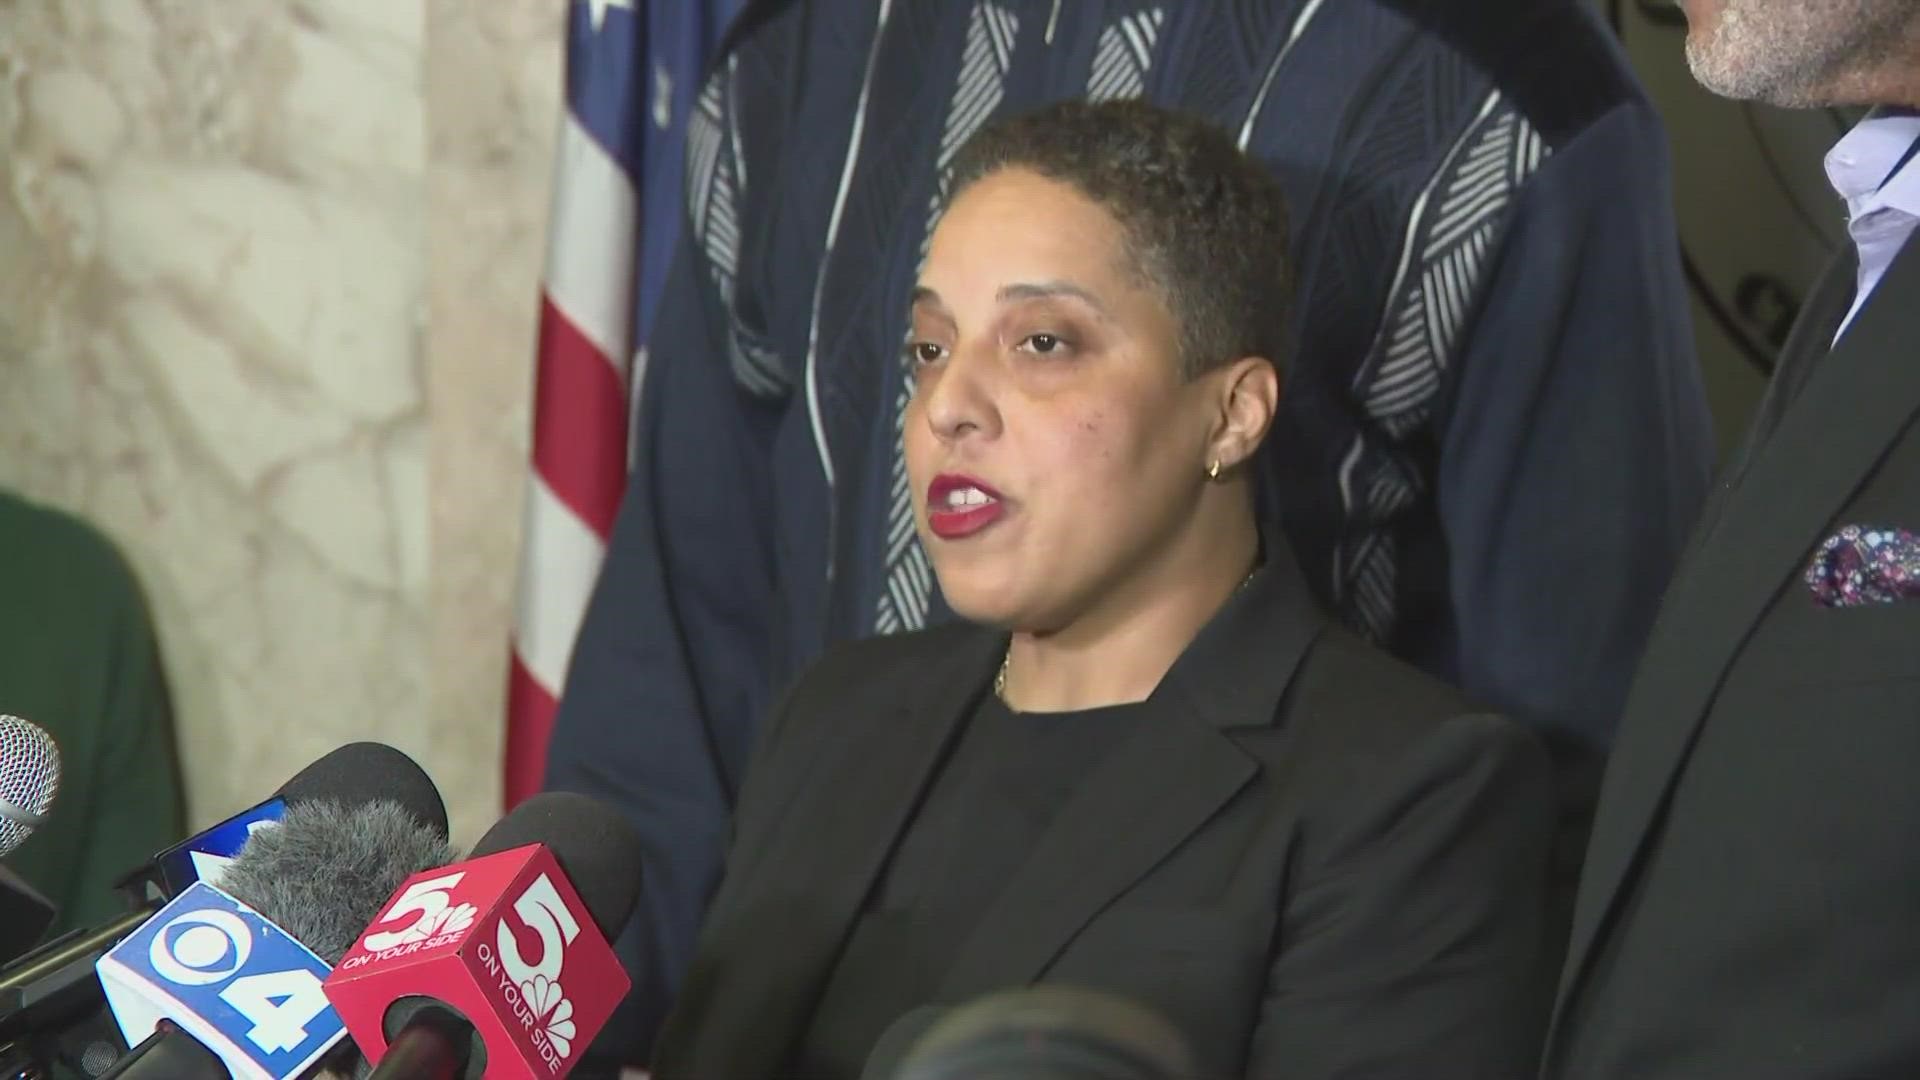 After Mayor Tishaura Jones called for Kim Gardner to 'take accountability,' the city prosecutor dodged questions, deflected blame and stoked racial divisions